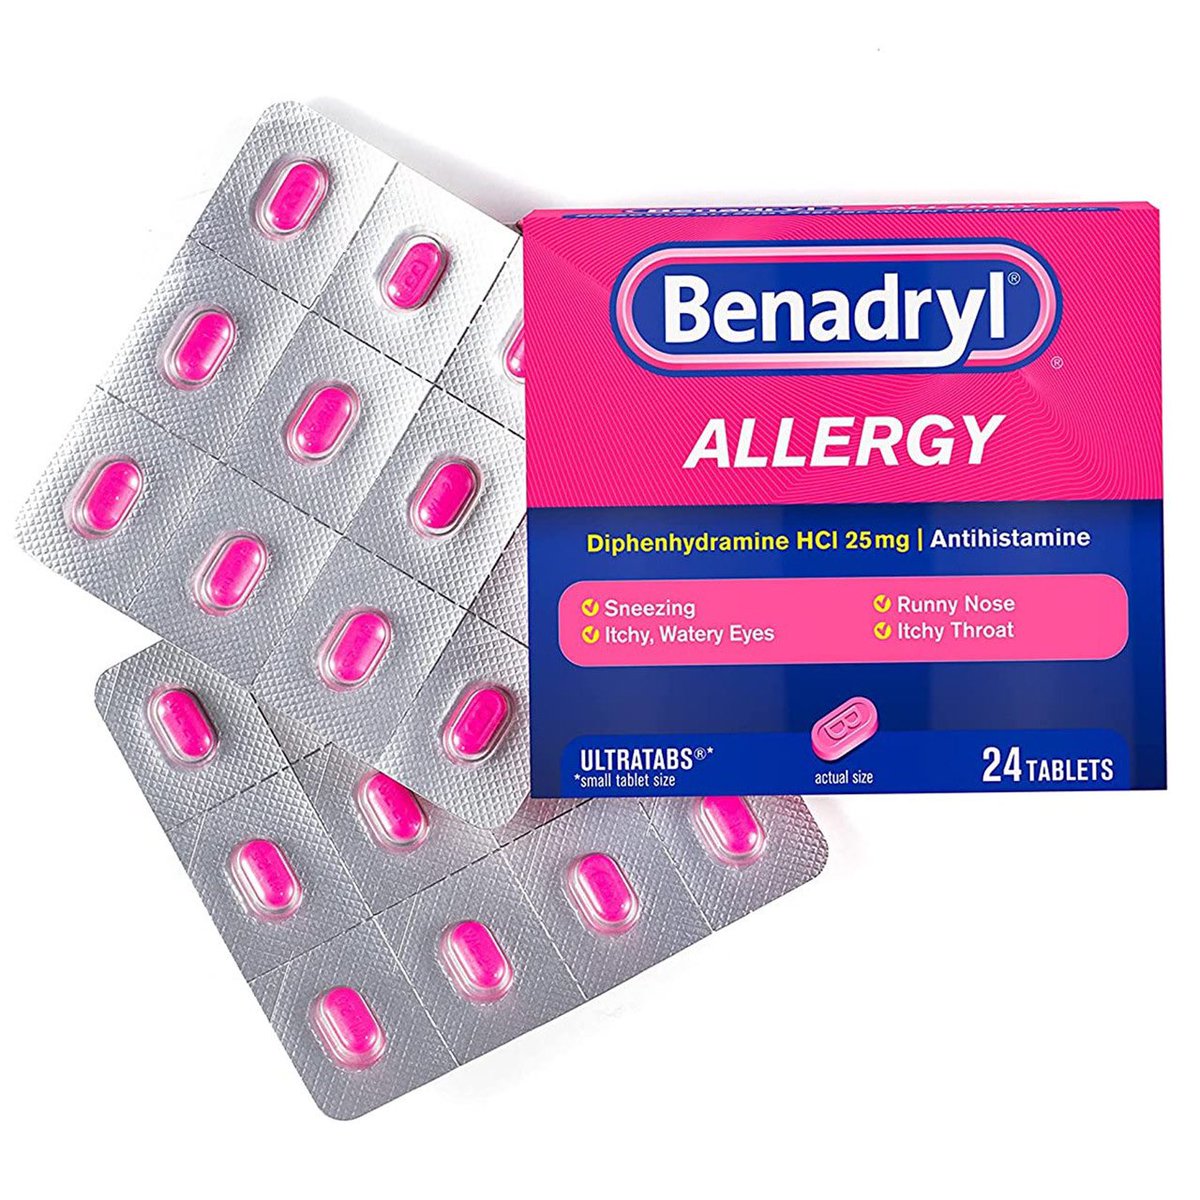 Benadryl: for when the Midwest allergies are so bad you’d rather be in a coma